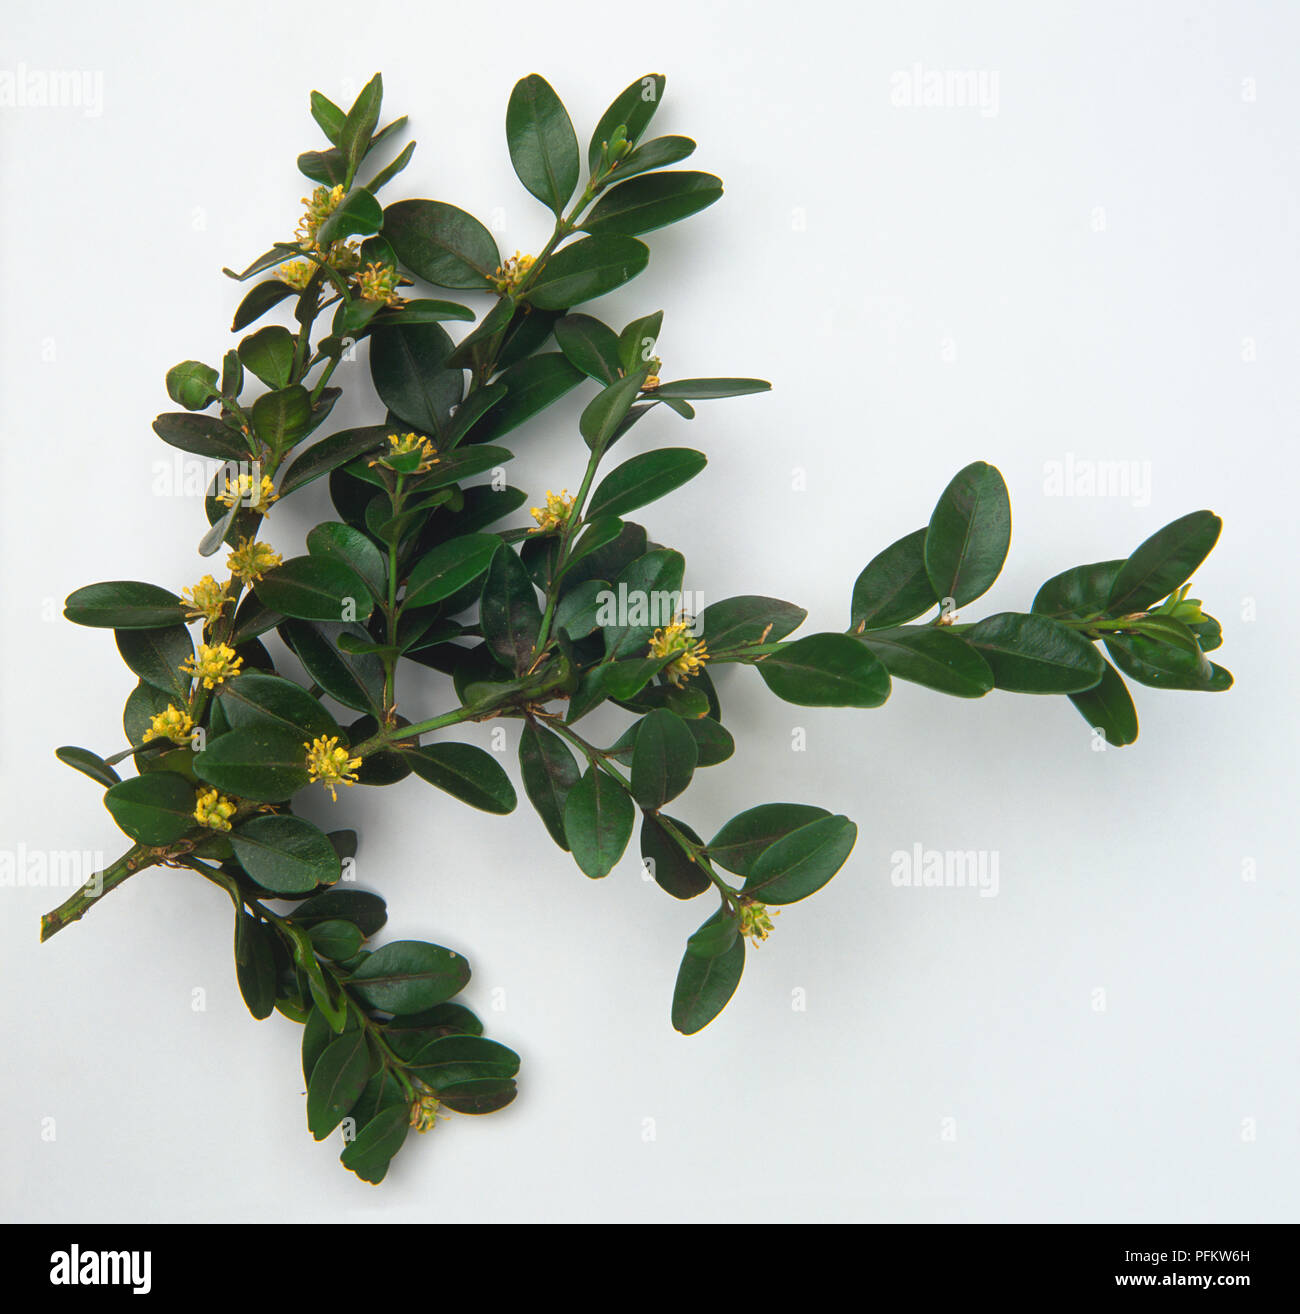 Buxus sempervirens, box, dark green leathery shiny leaves. Stock Photo